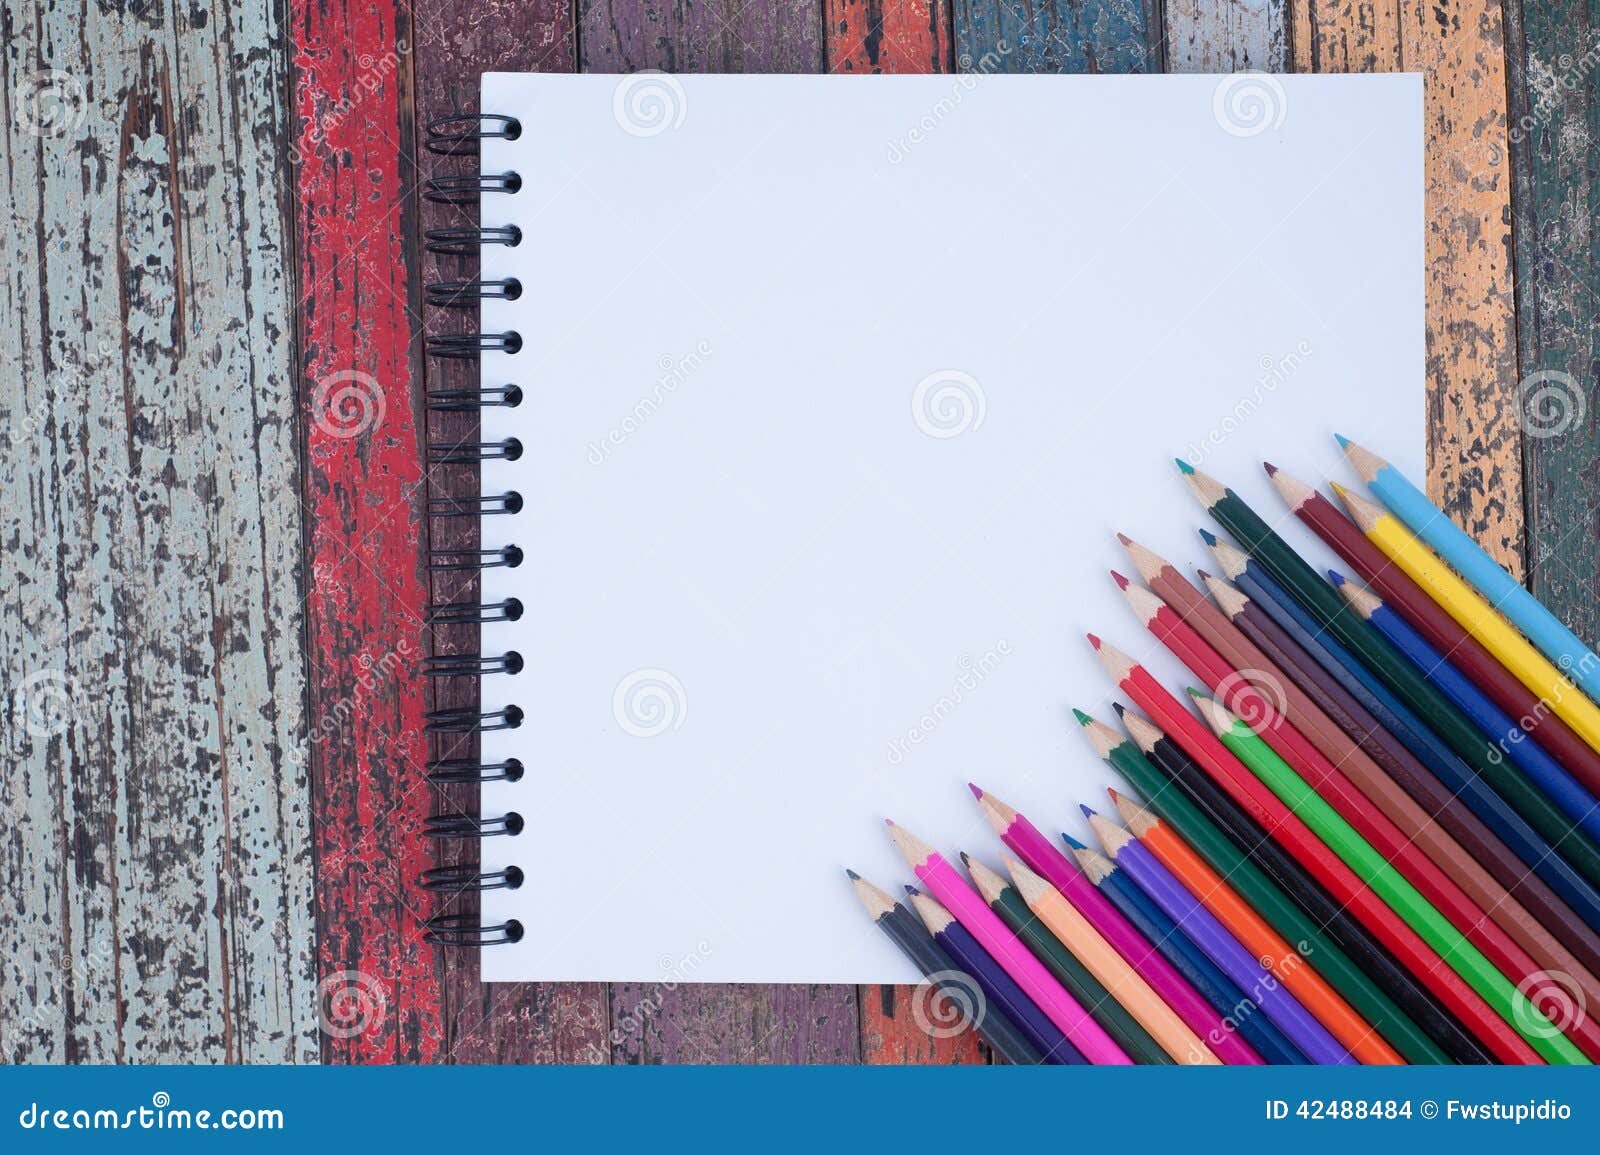 https://thumbs.dreamstime.com/z/color-pencil-sketch-book-vintage-wood-table-background-text-42488484.jpg